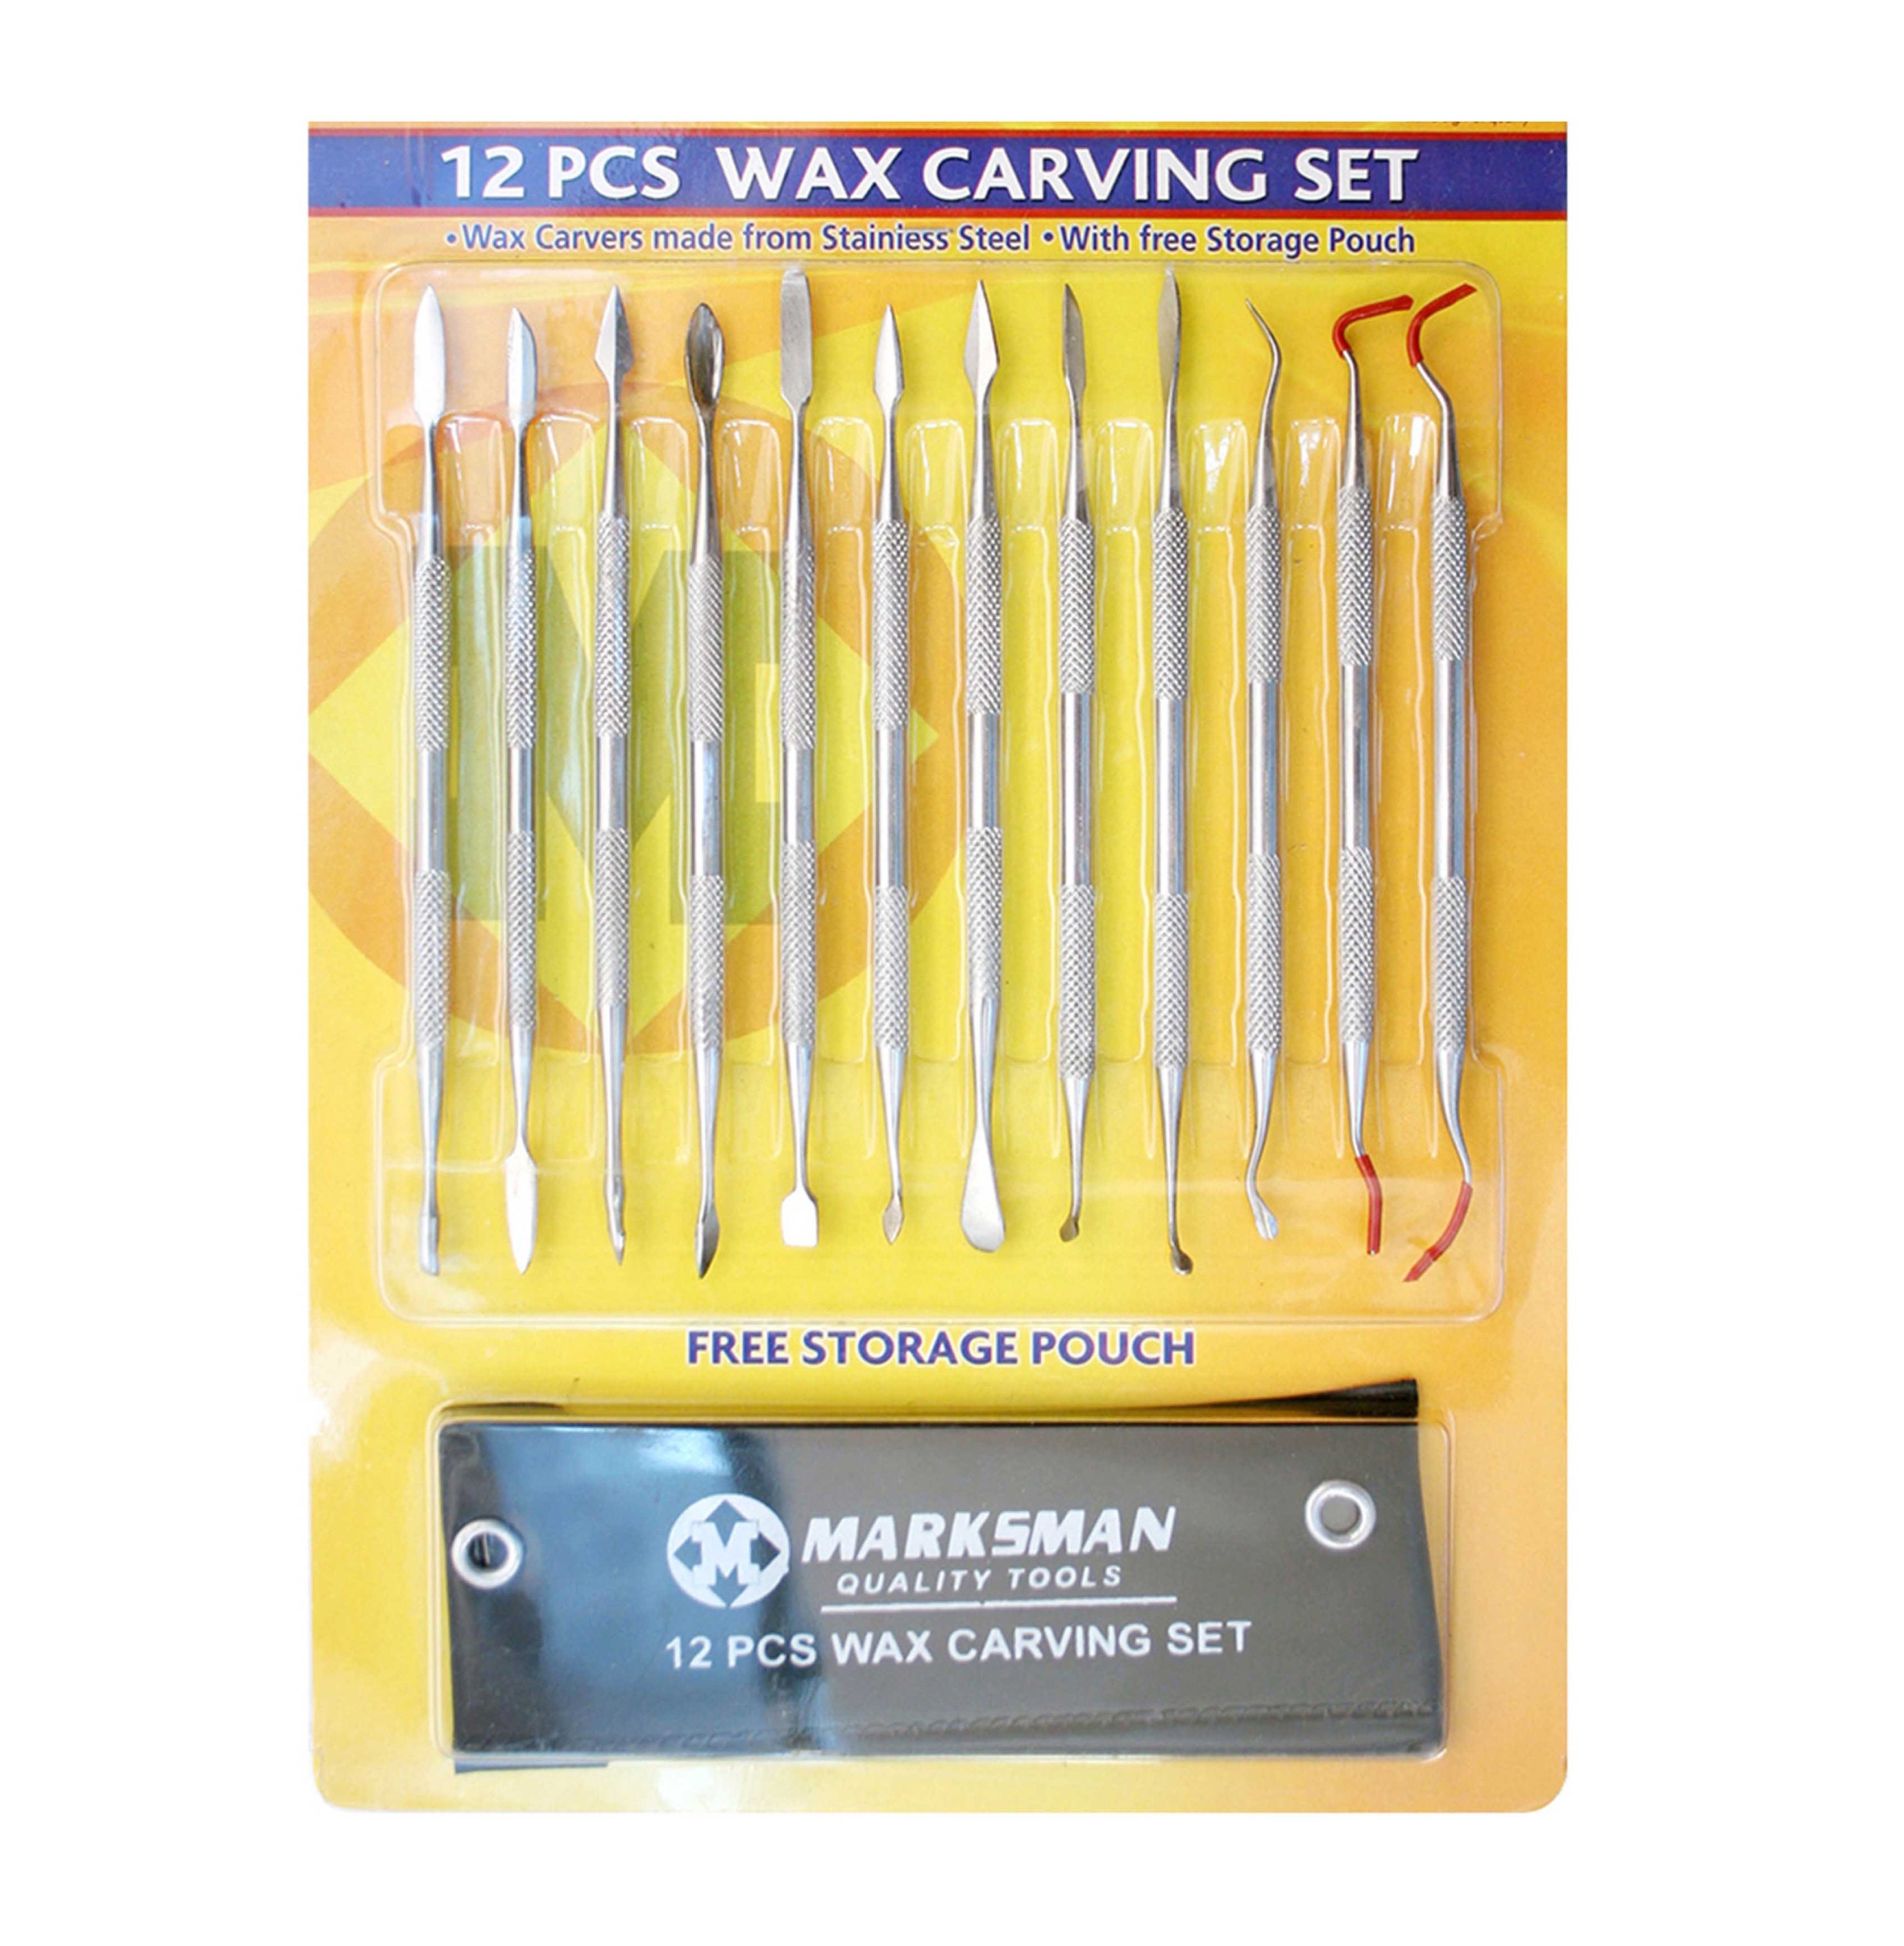 6 Pieces Wax Carving Tool Set Double-Ended Carving Tool Stainless